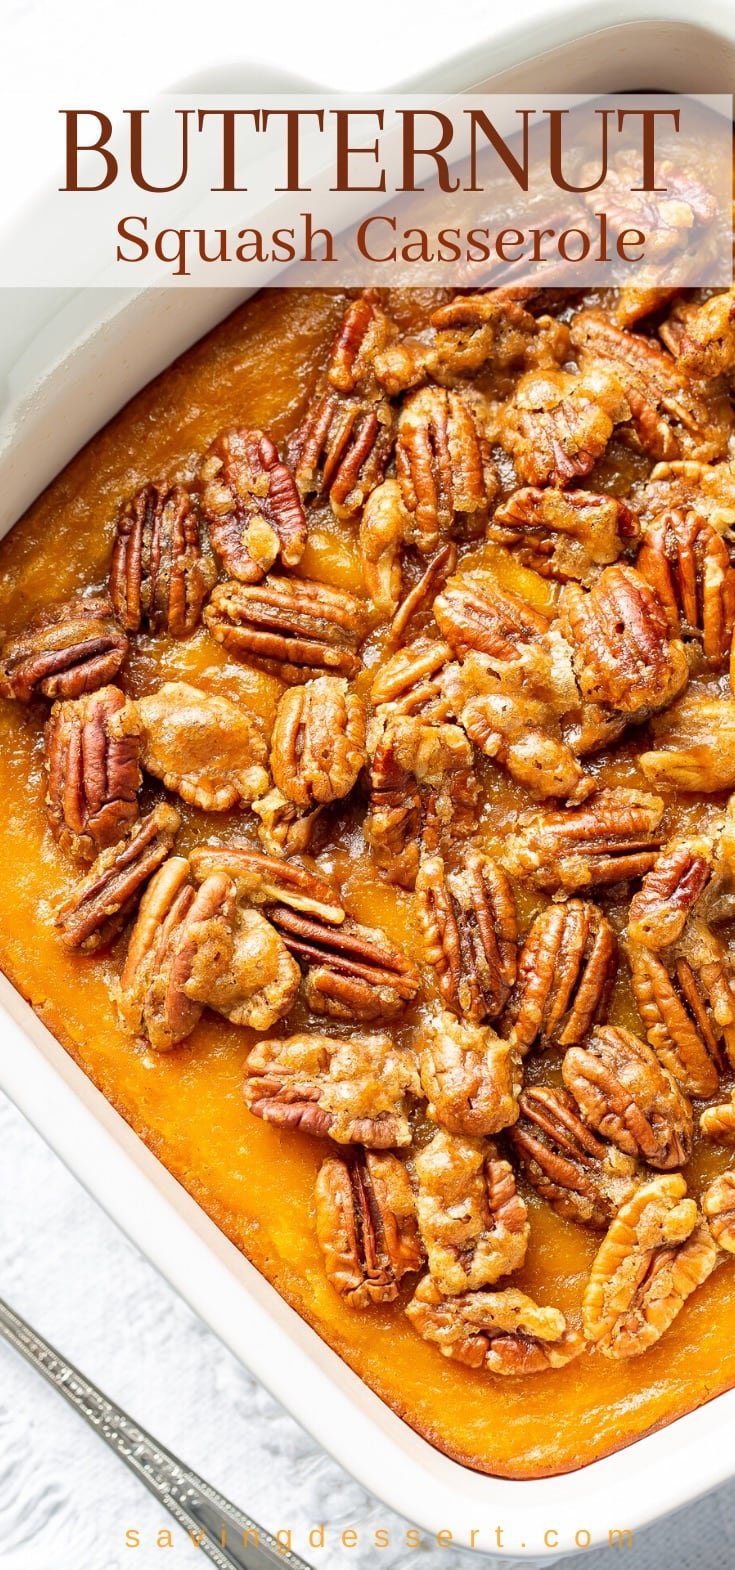 Butternut squash casserole topped with pecans